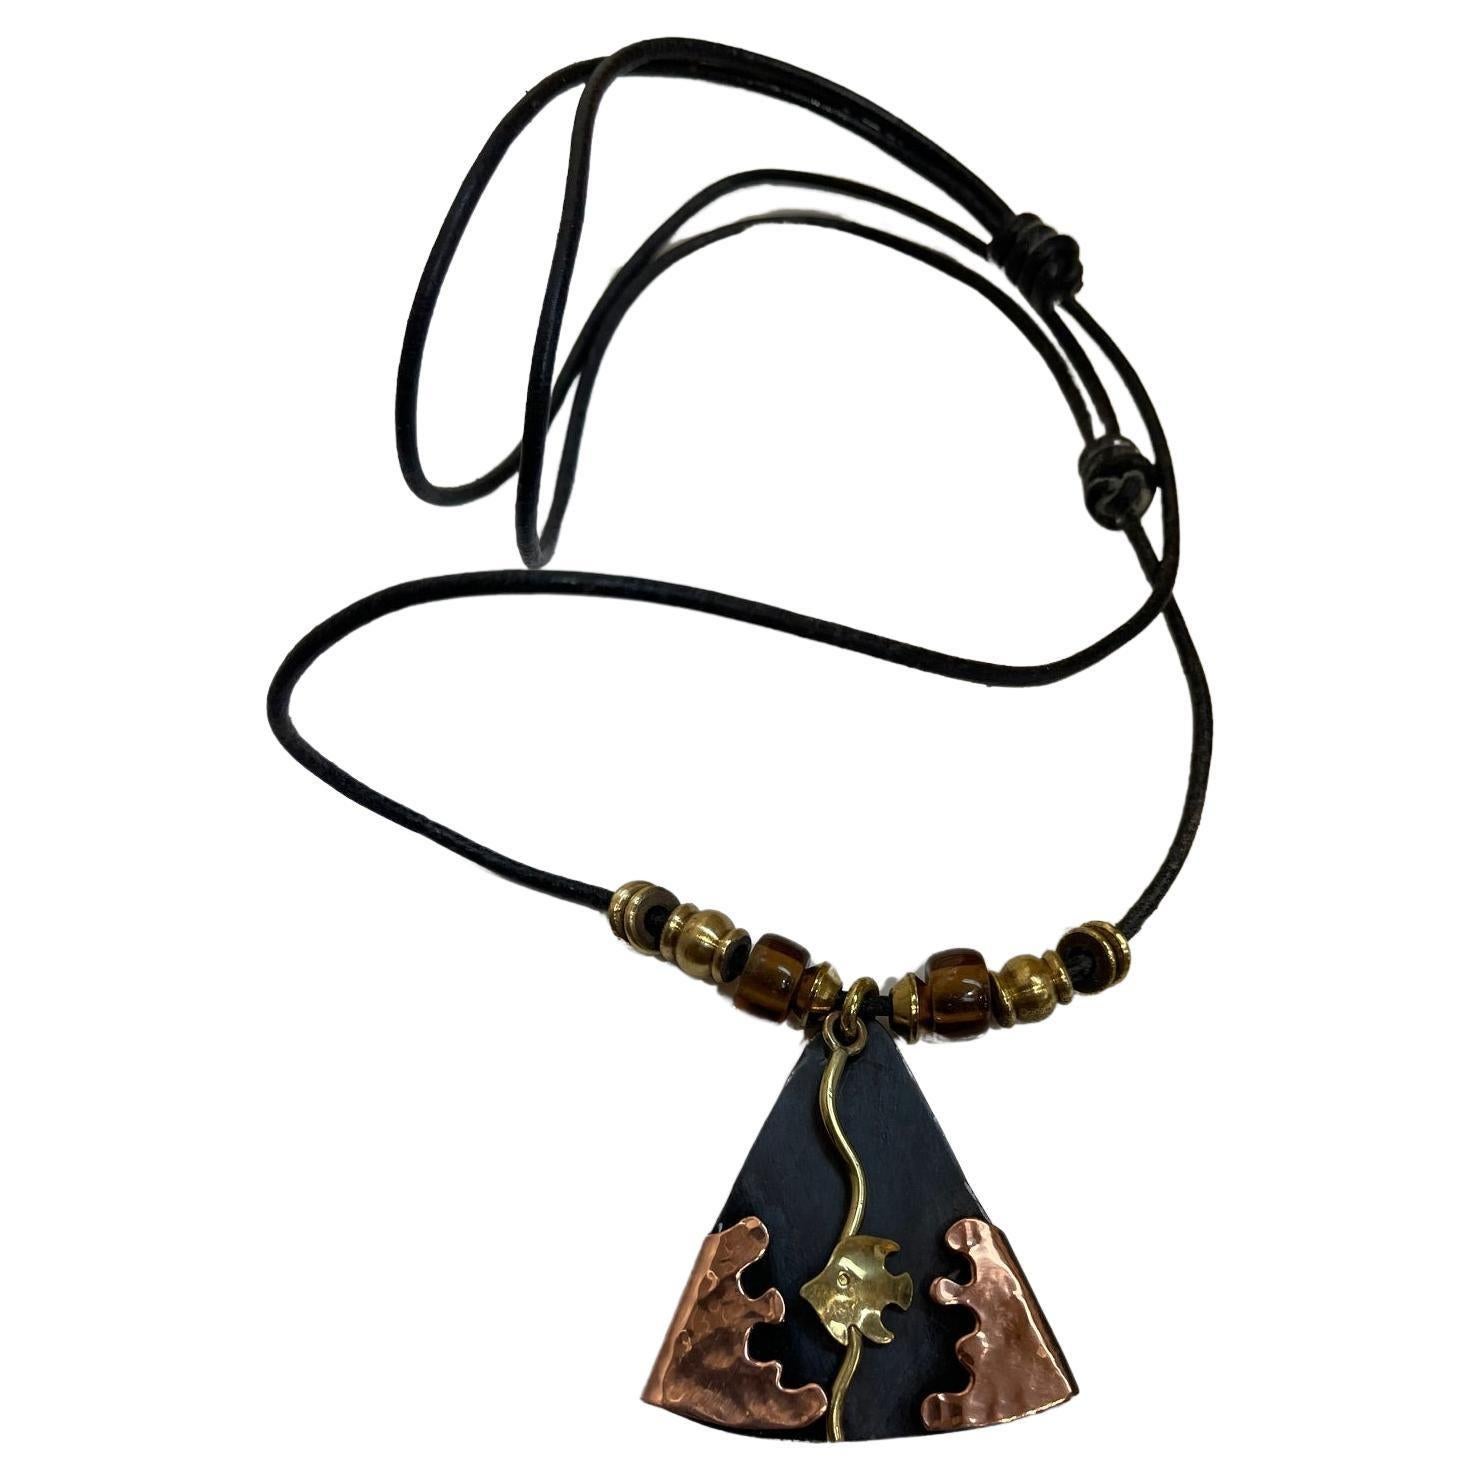 Simply Beautiful! Vintage Designer Signed Abstract Mid Century Modern Pendant Necklace. Featuring Hand crafted Golden Fish and Copper Waves on Triangular Black Lucite. Suspended from a Black Leather cord, measuring approx. 21.5